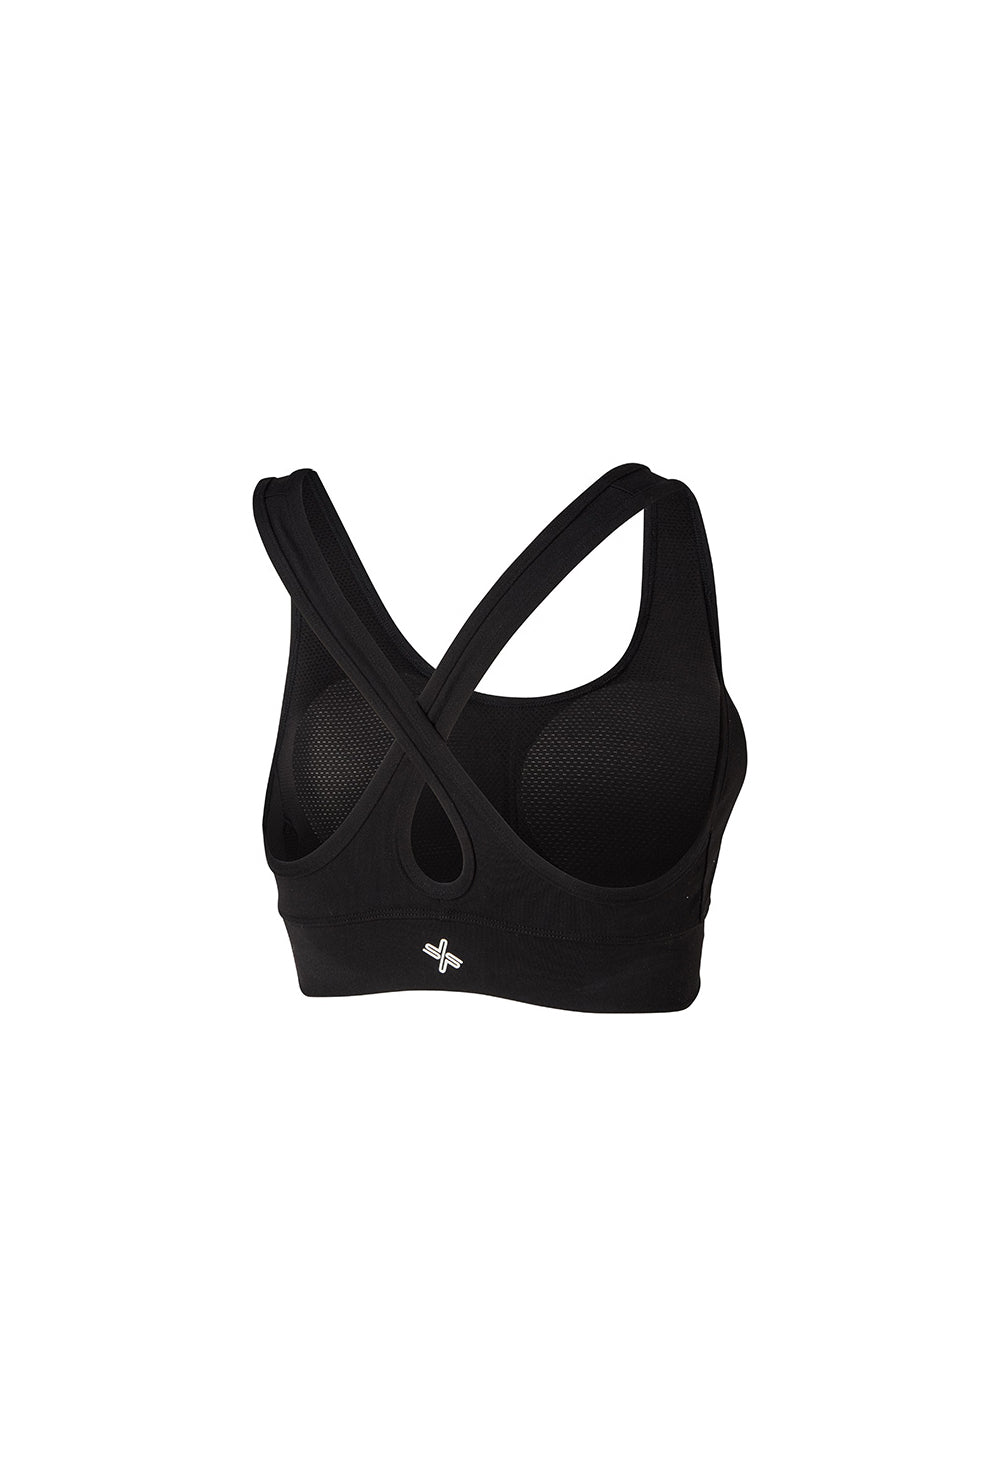 All In Motion Women's Medium Support Seamless Cami Midline Sports Bra XXL  Black - $19 New With Tags - From Sohir